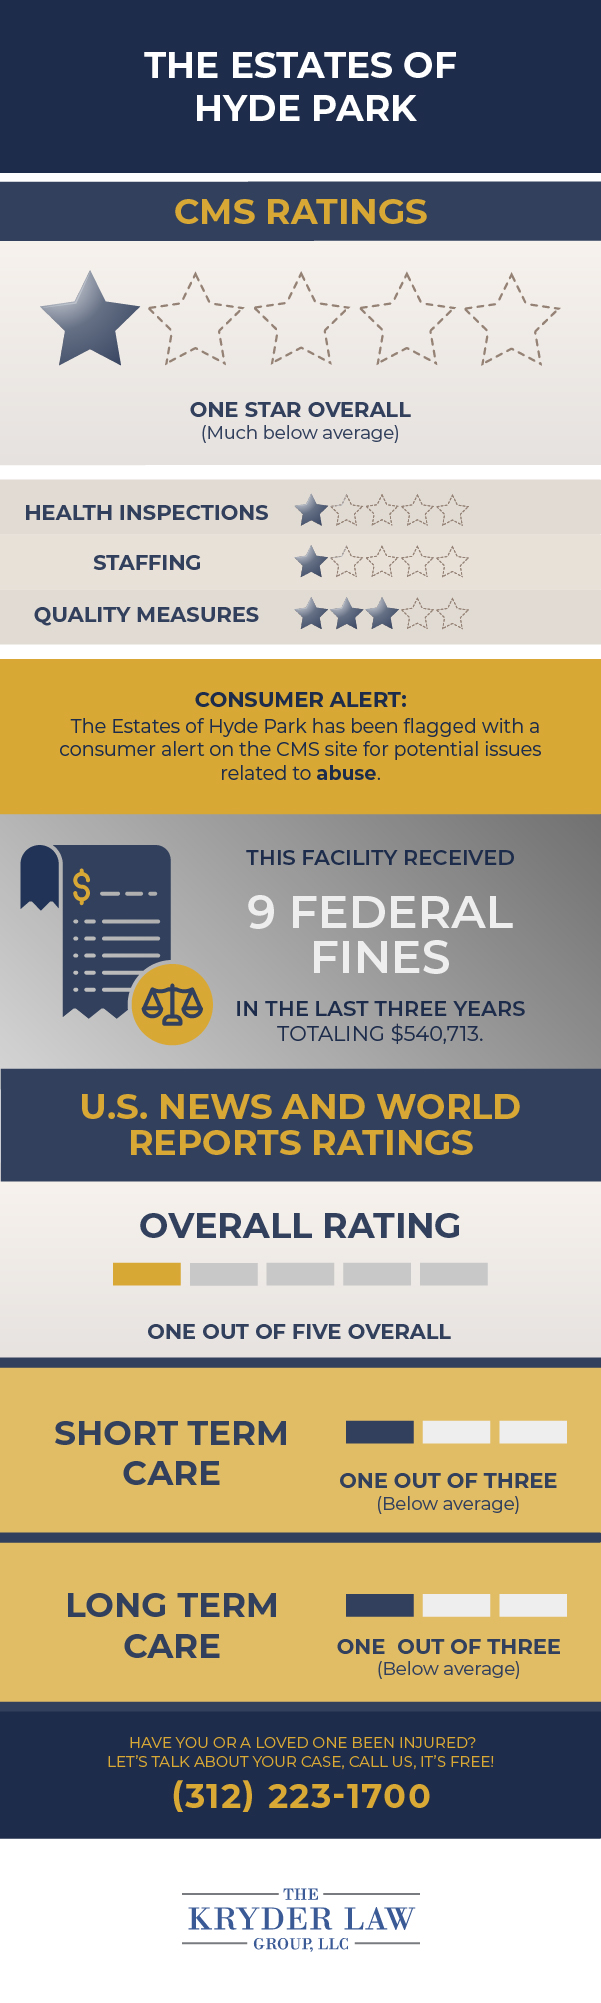 The Estates of Hyde Park CMS Ratings and U.S. News & World Reports Ratings